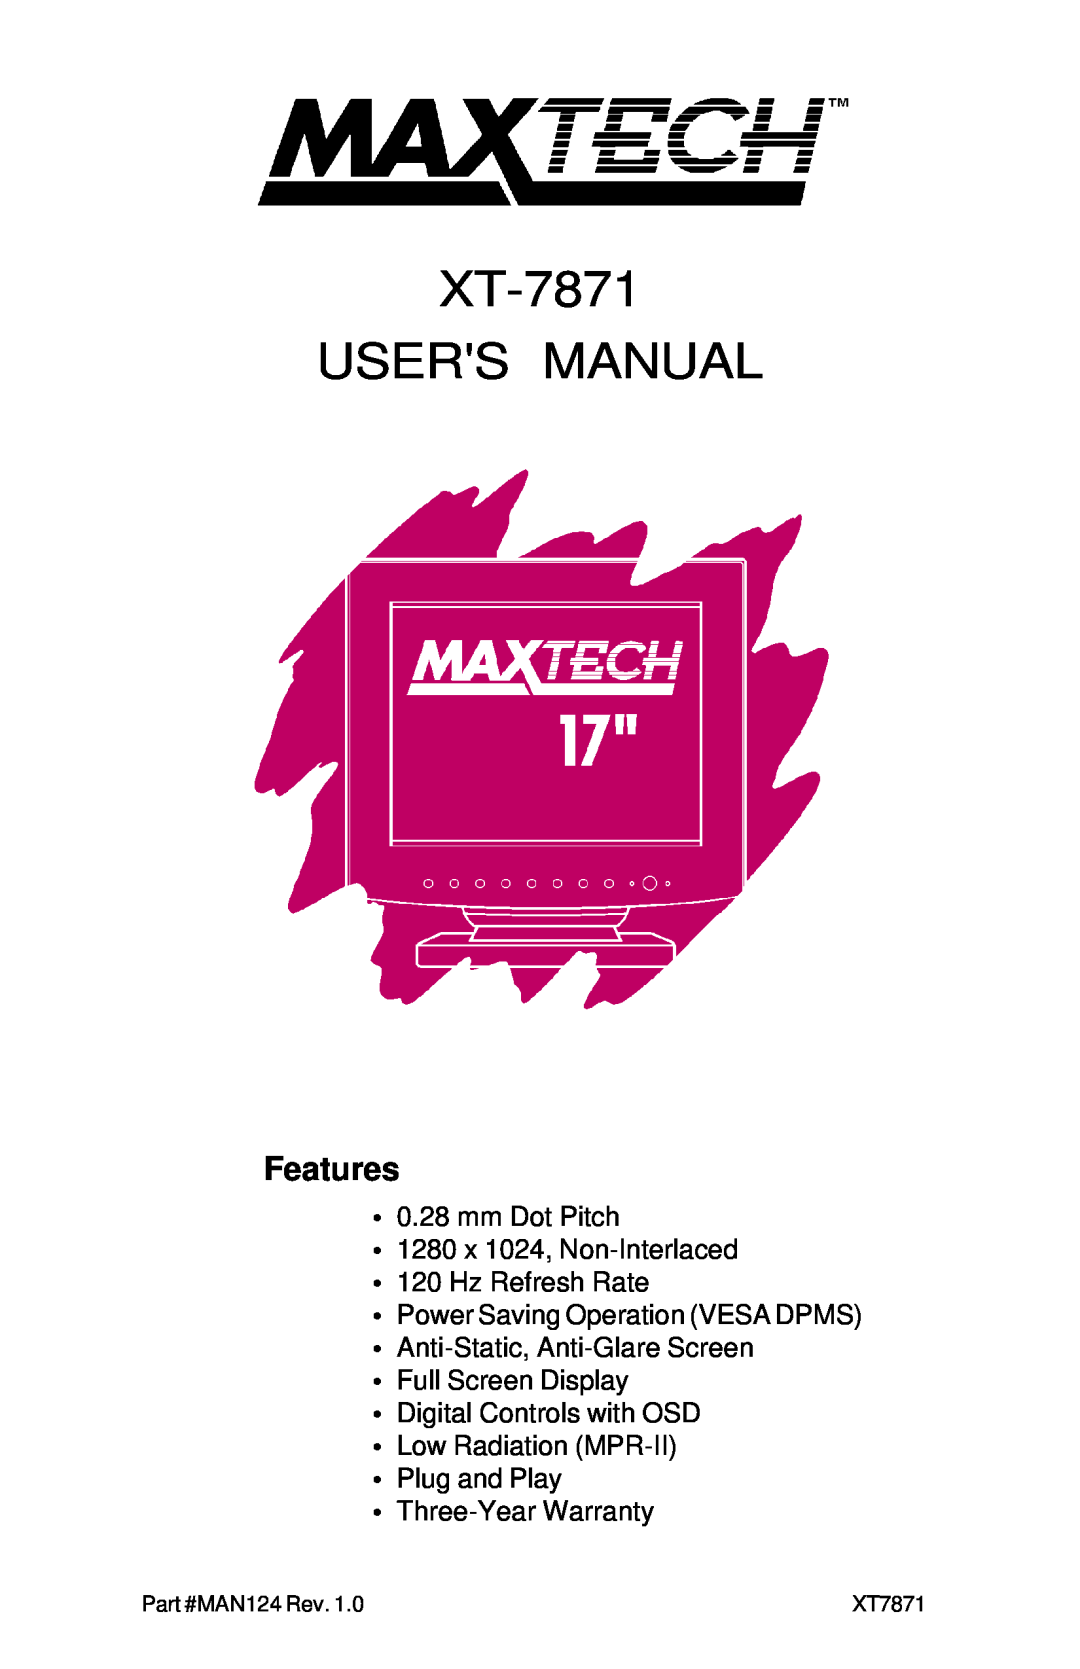 MaxTech user manual Features, XT-7871 USERS MANUAL, mm Dot Pitch 1280 x 1024, Non-Interlaced 120 Hz Refresh Rate 